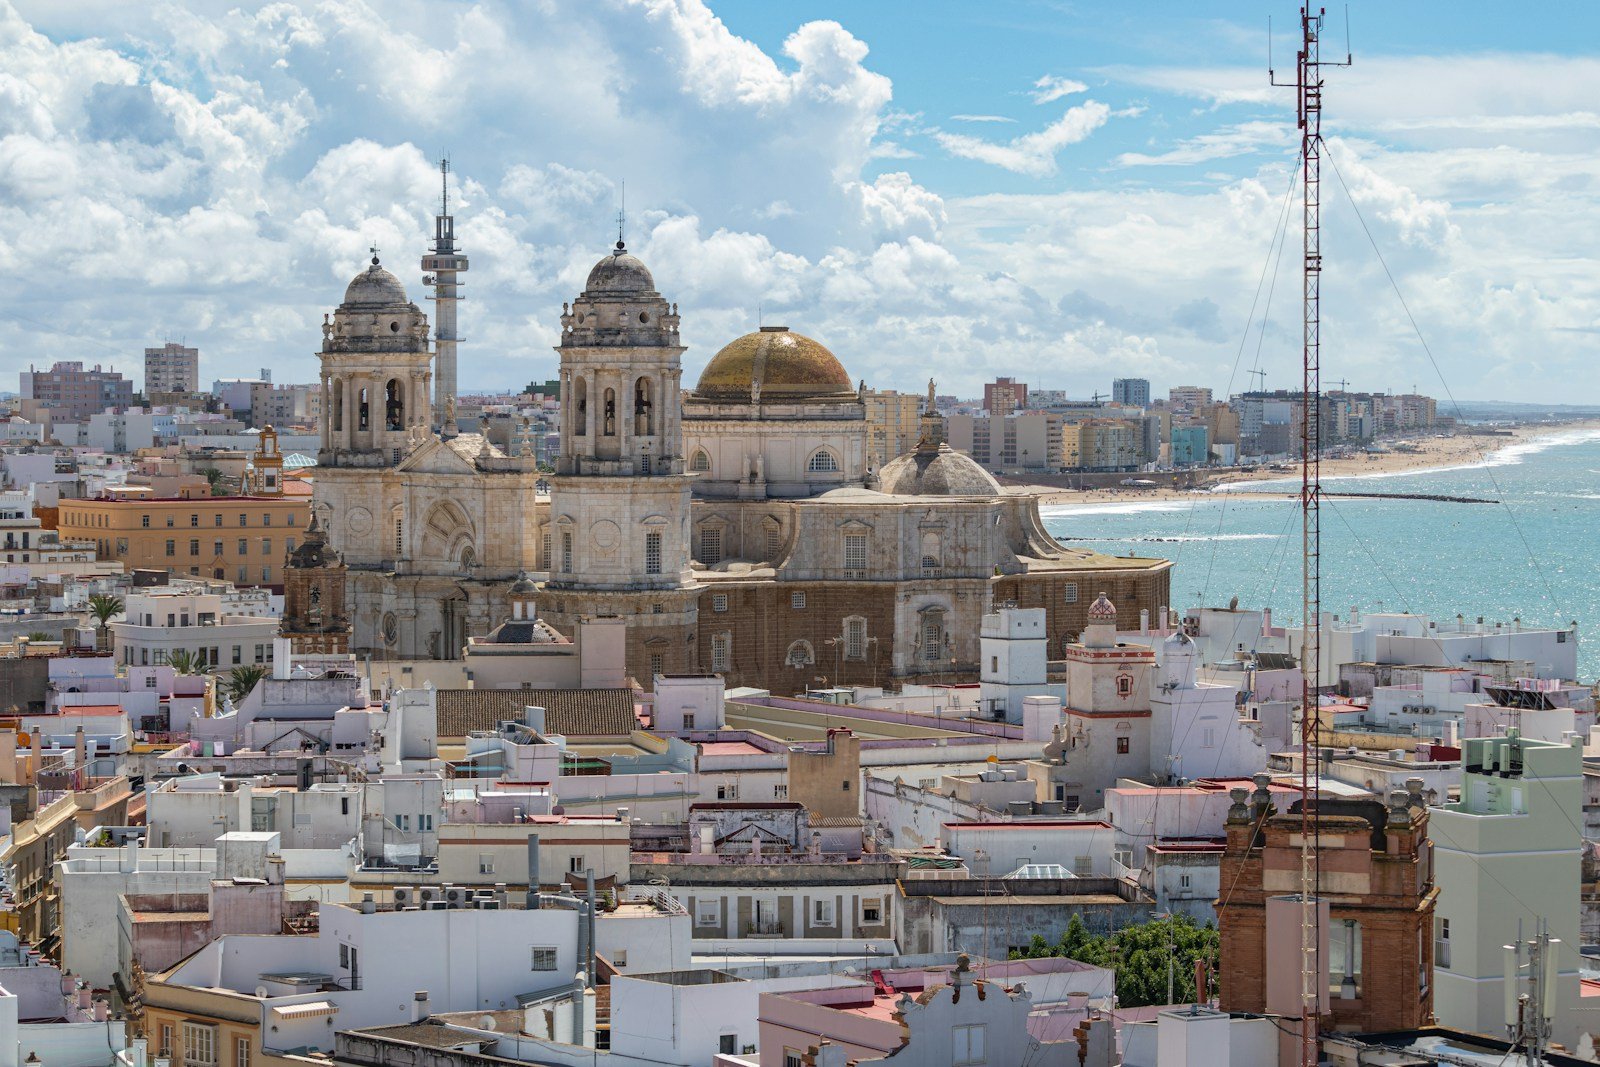 seo local para restaurantes en cádiz - a view of a city with a large body of water in the background